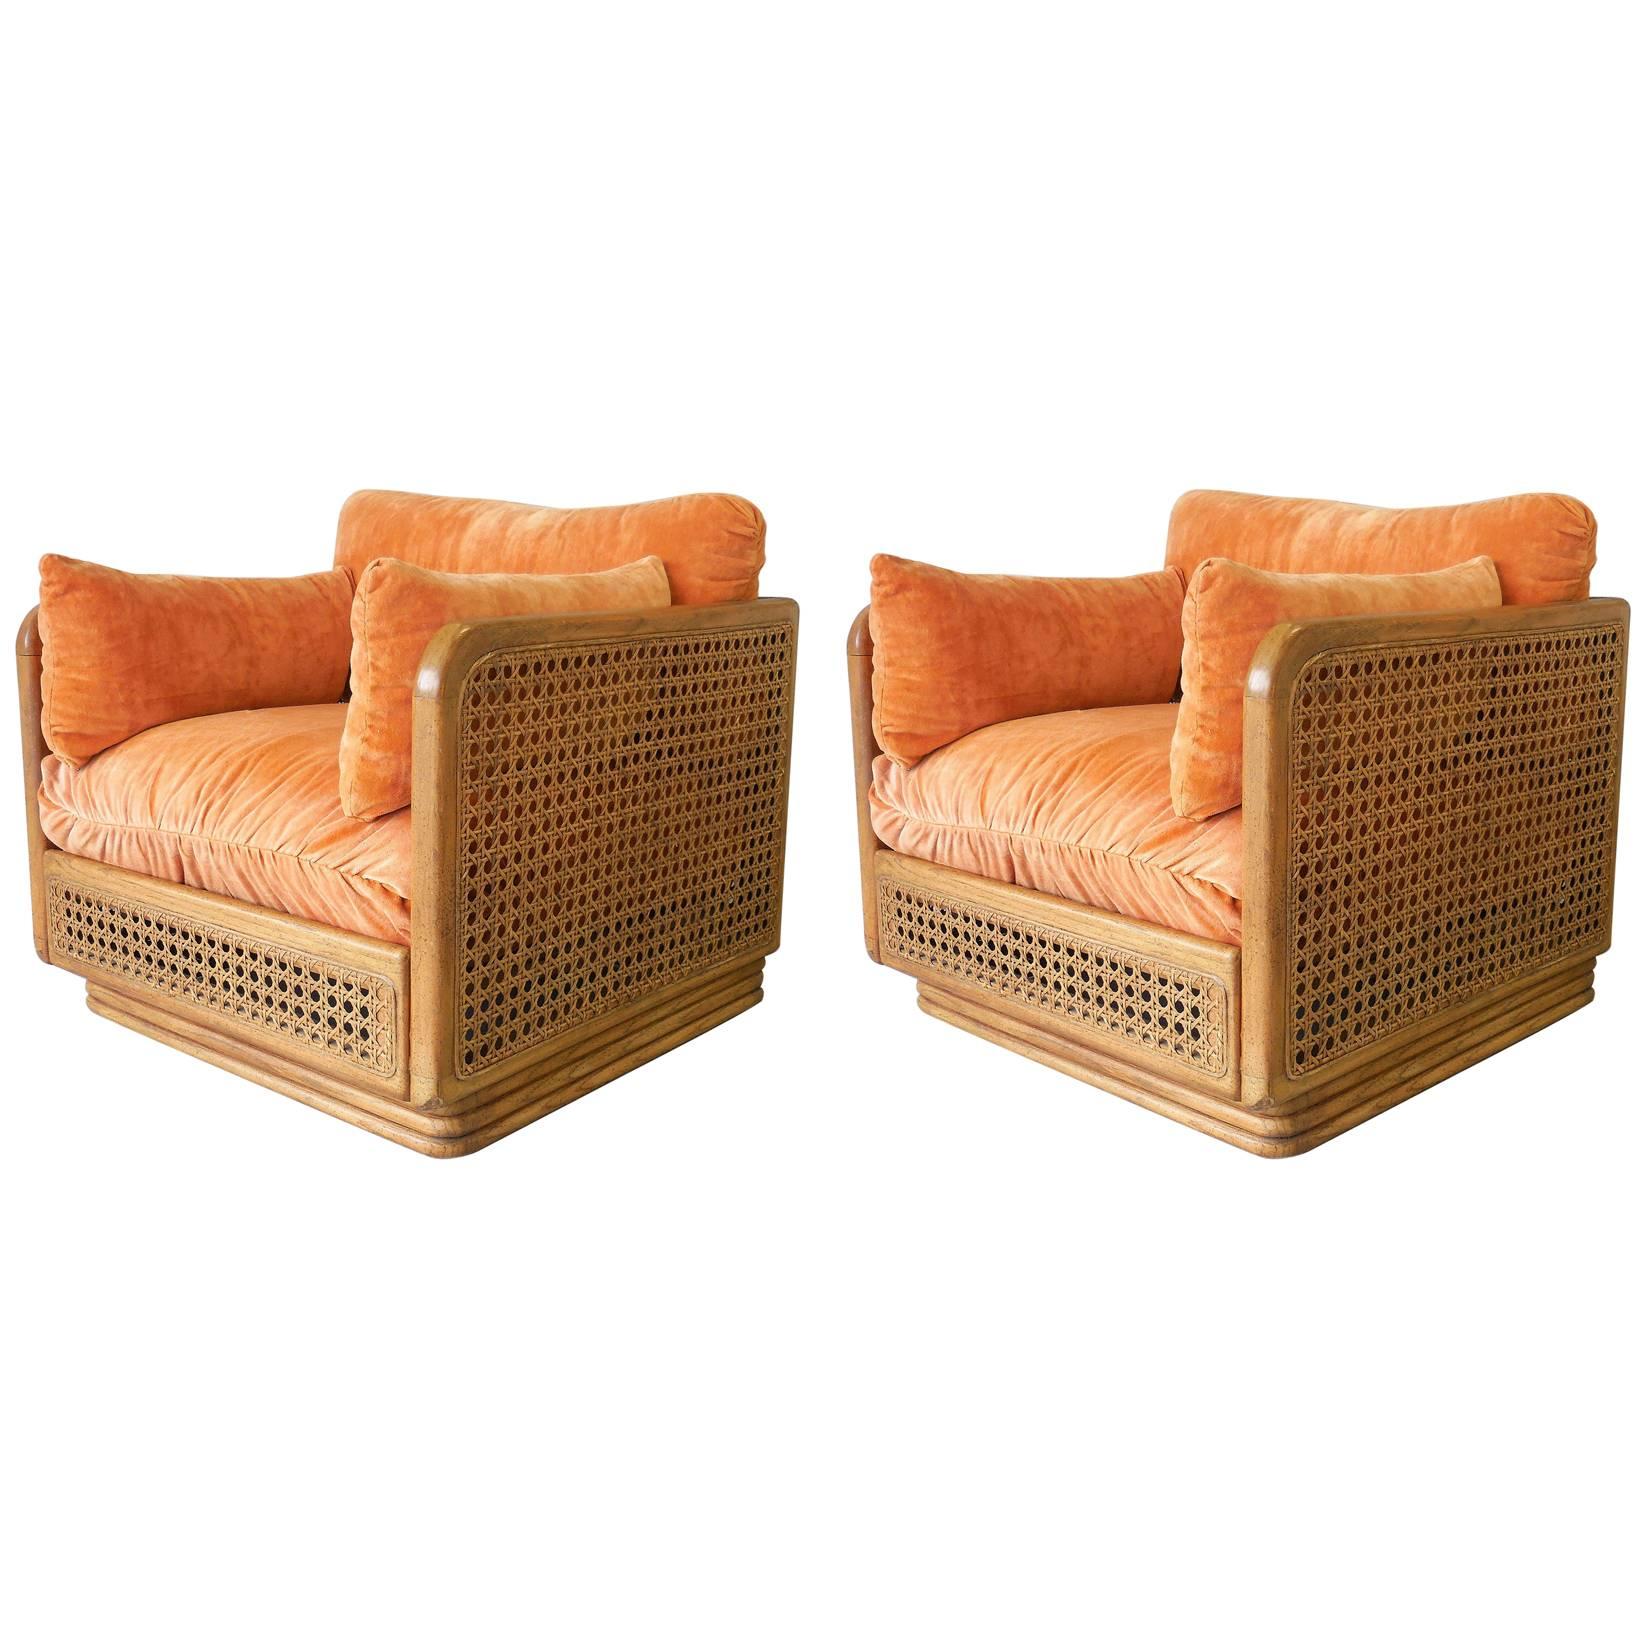 Pair of Cube Cane Modern Club Lounge Chairs, 1970s